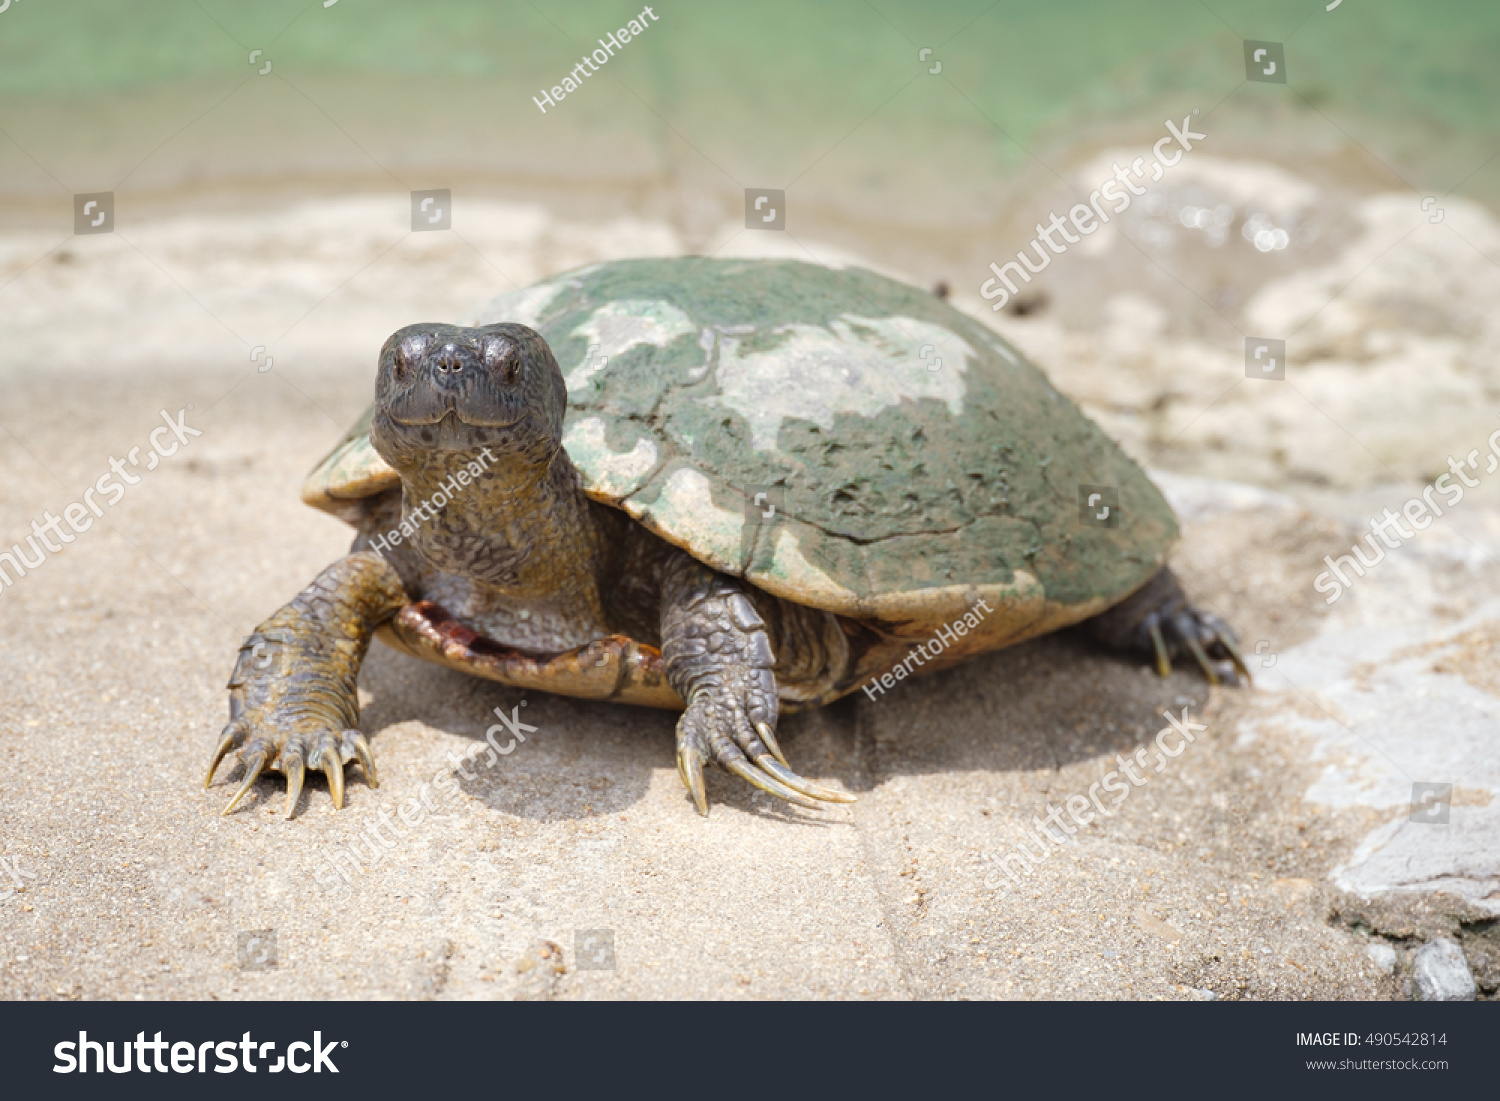 Mud turtle A smiling face #490542814